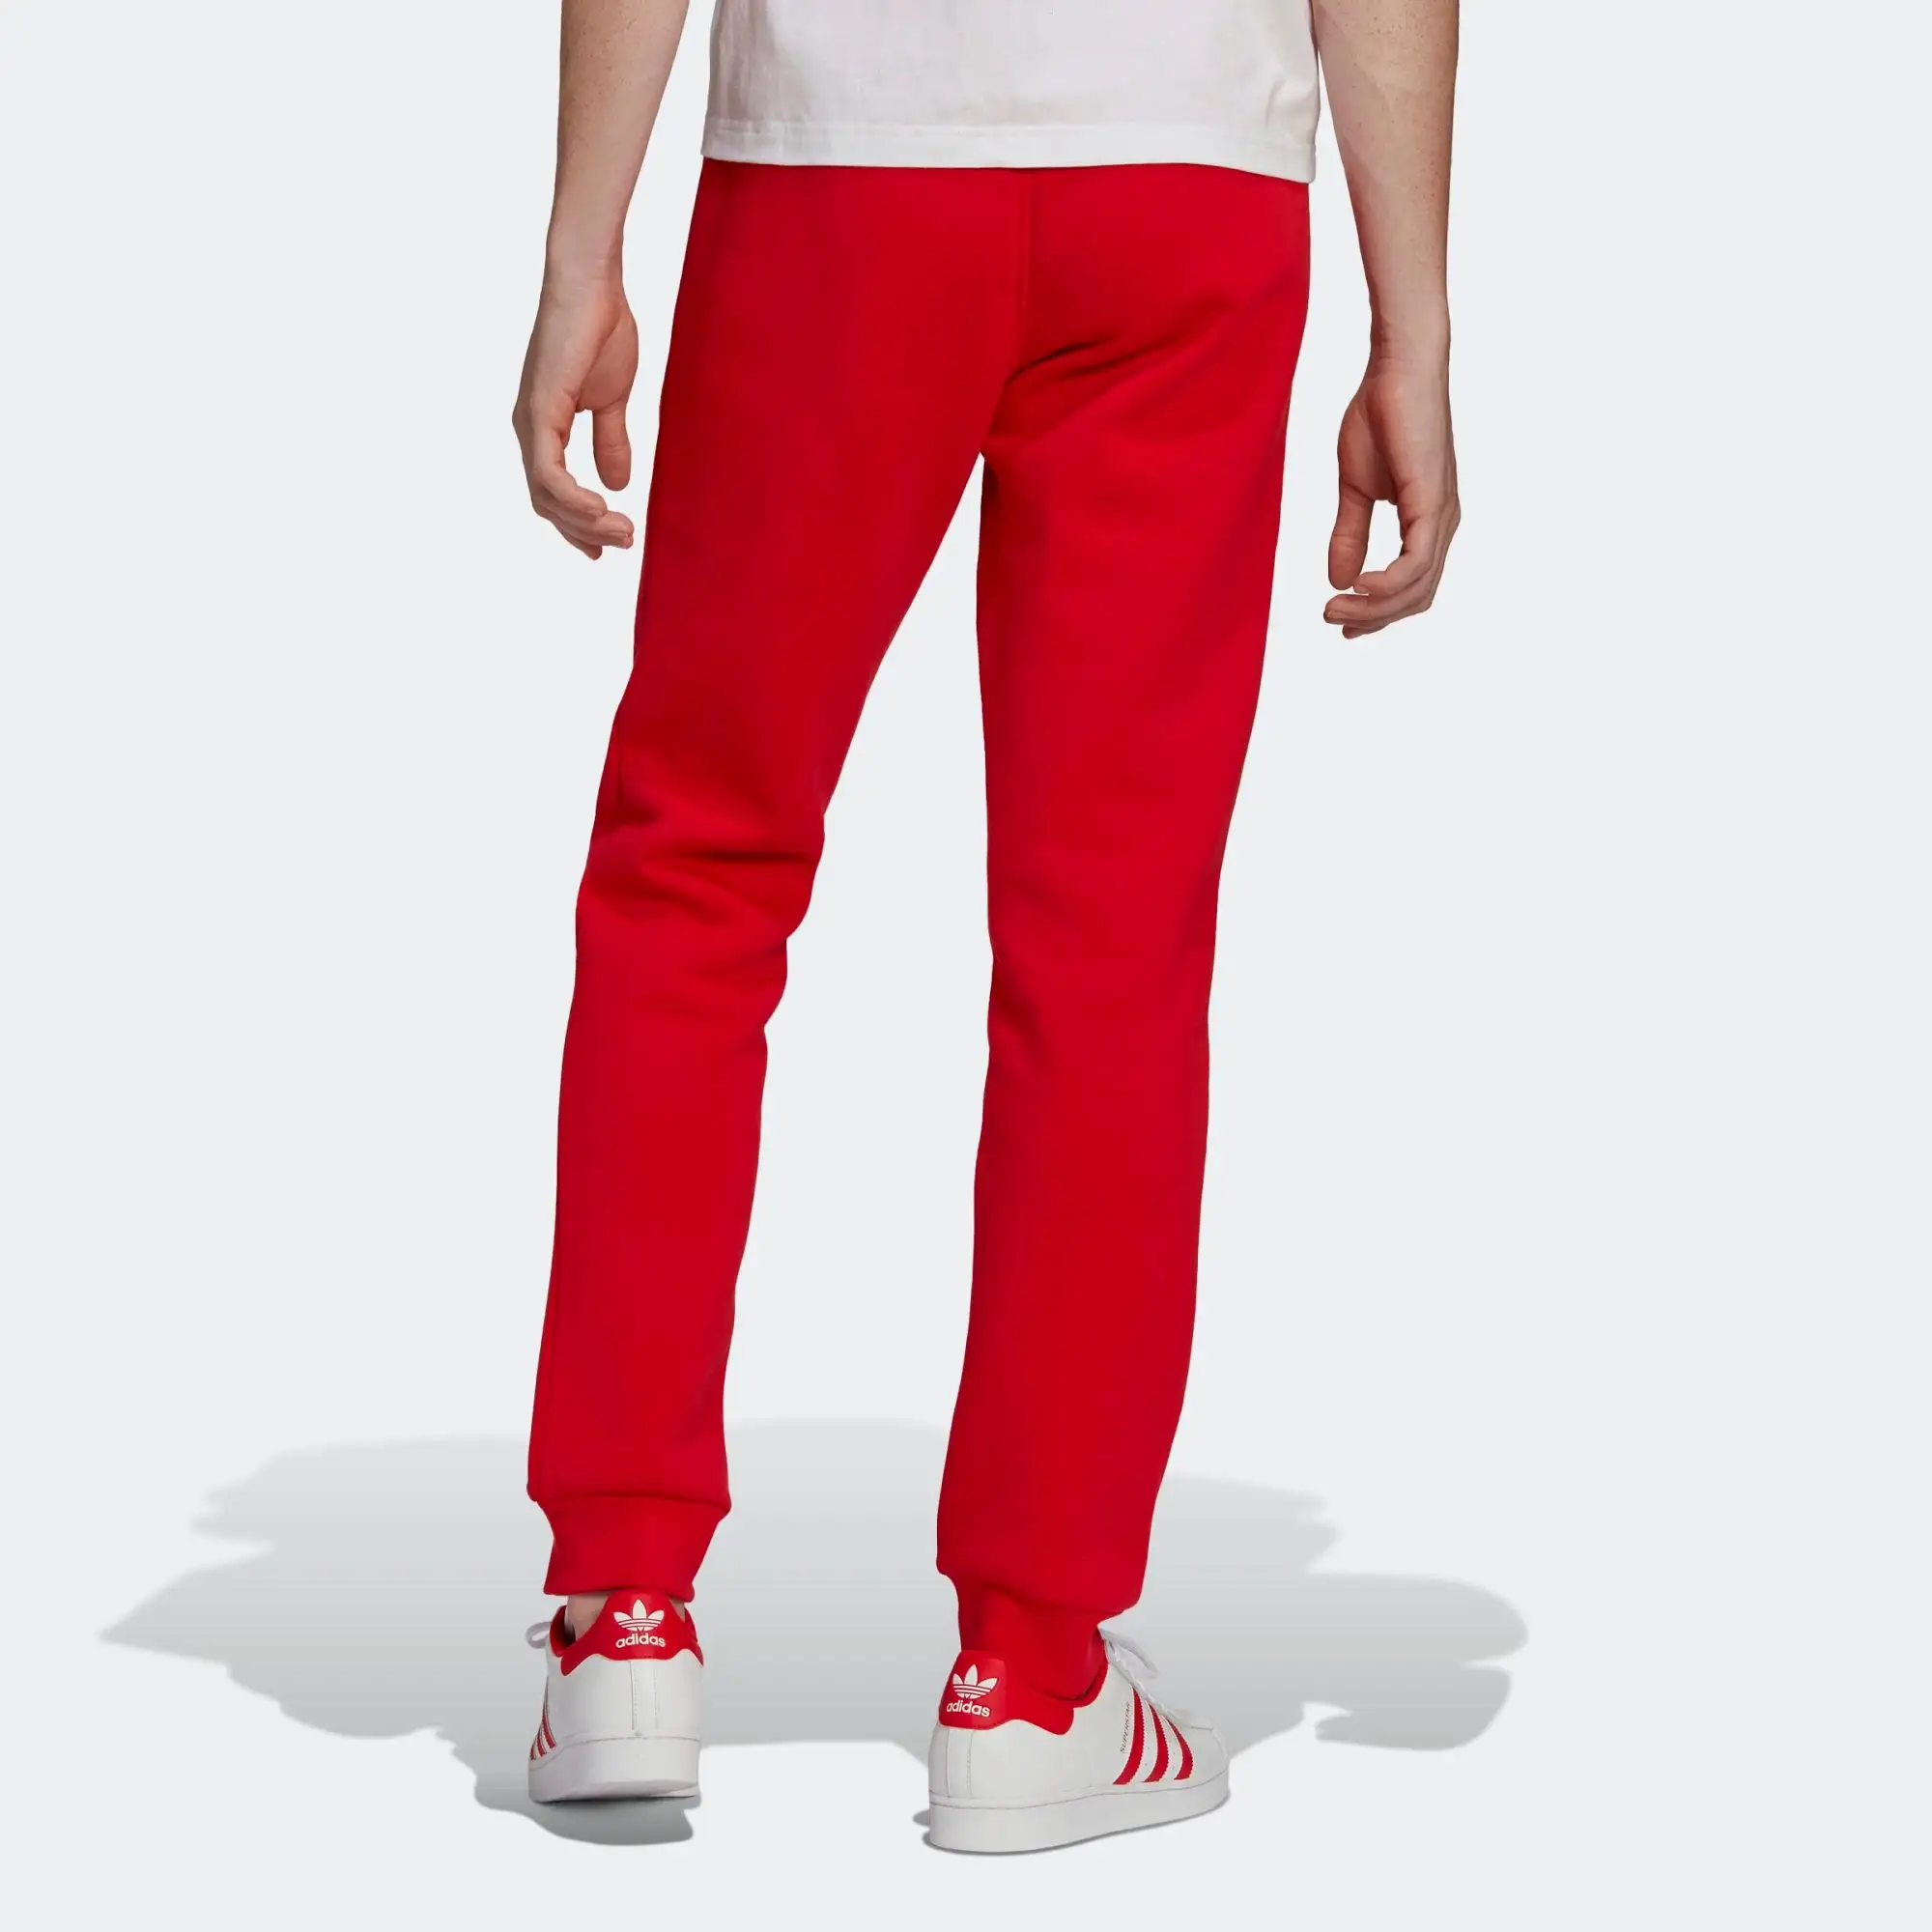 Slim Fit Trefoil Sweatpants Heavyweight 70% Cotton 30% Recycled Polyester Fleece Bright Red Essentials with Drawstring Logo